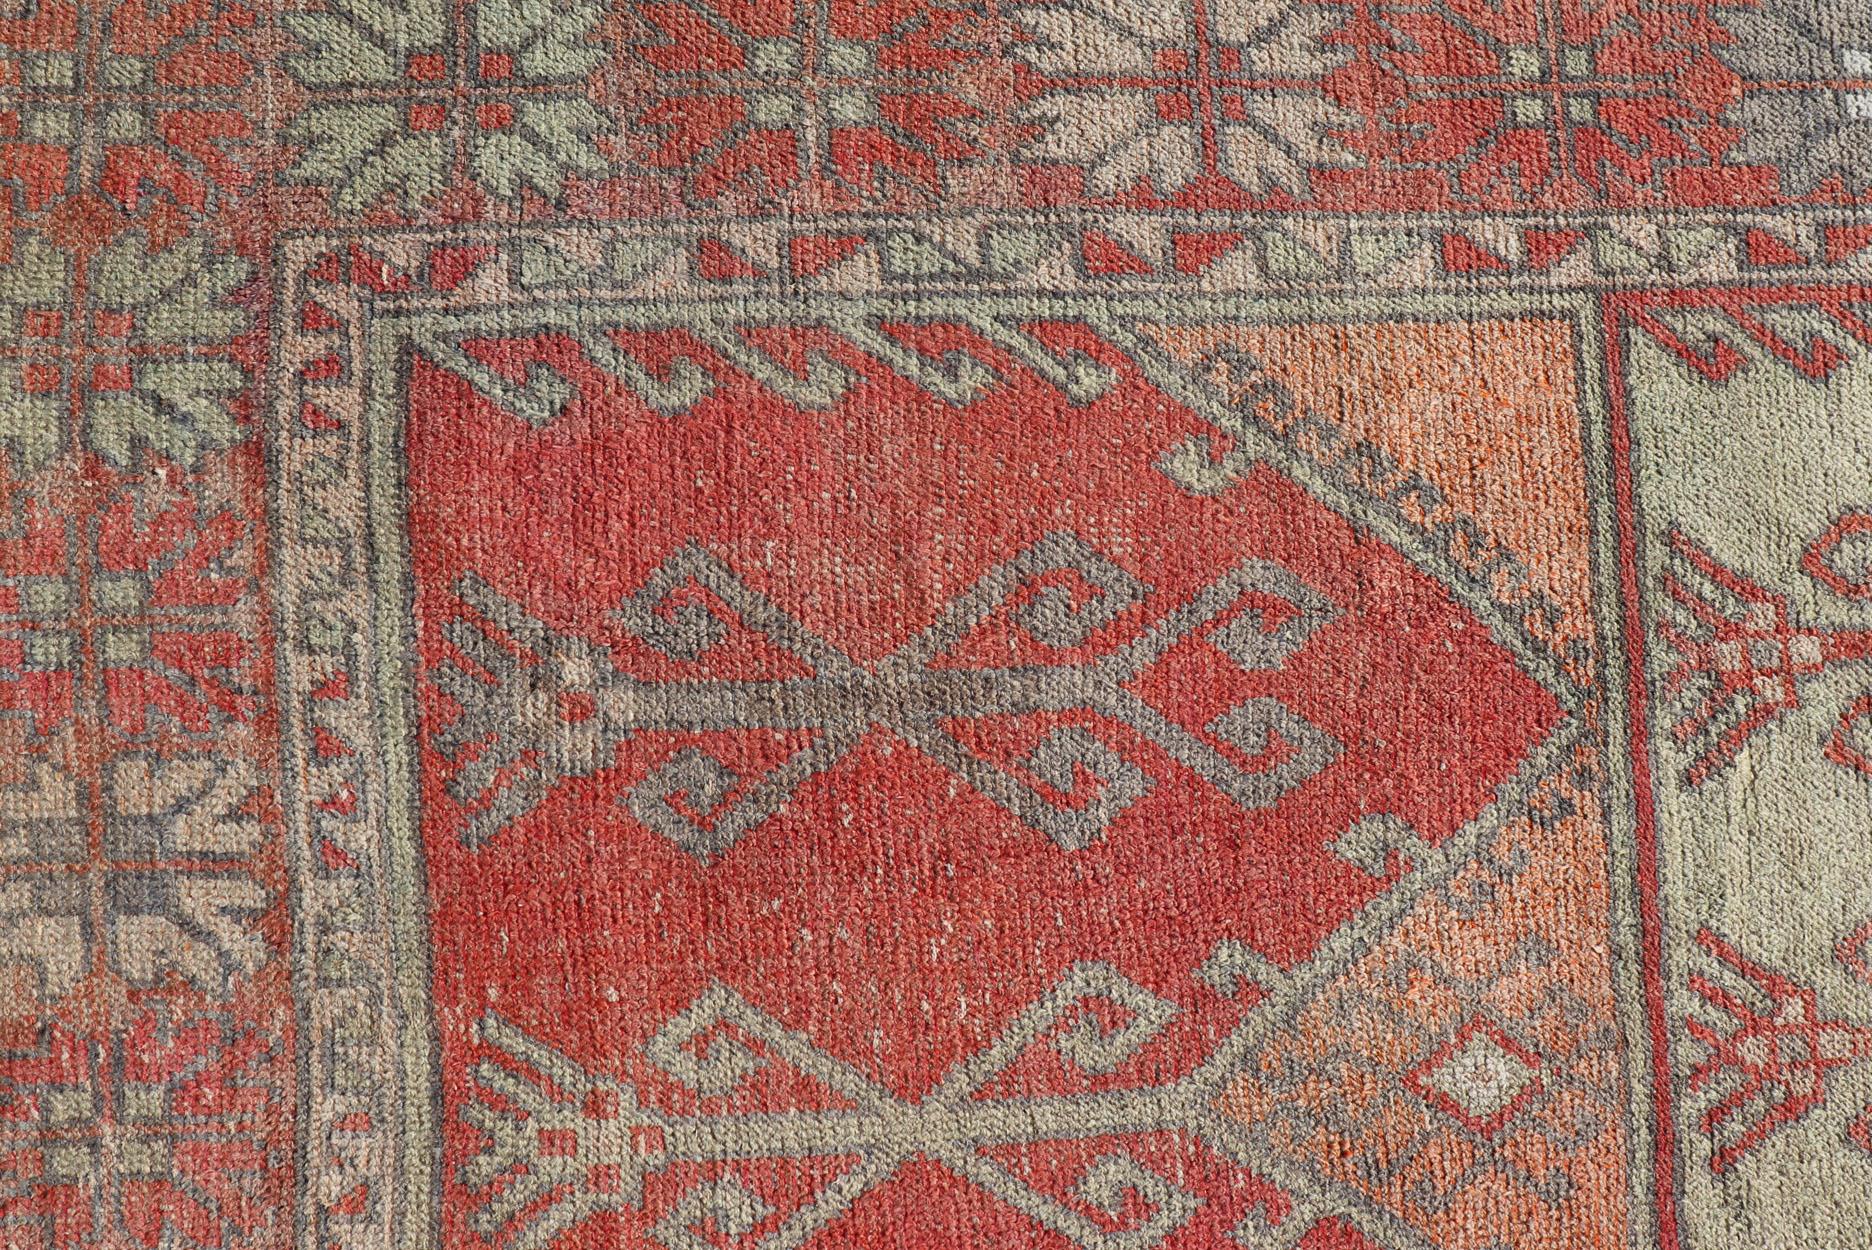 Gallery Rug, Vintage Turkish in Faded Red, Coral, Orange, Soft Pink and Green In Excellent Condition For Sale In Atlanta, GA